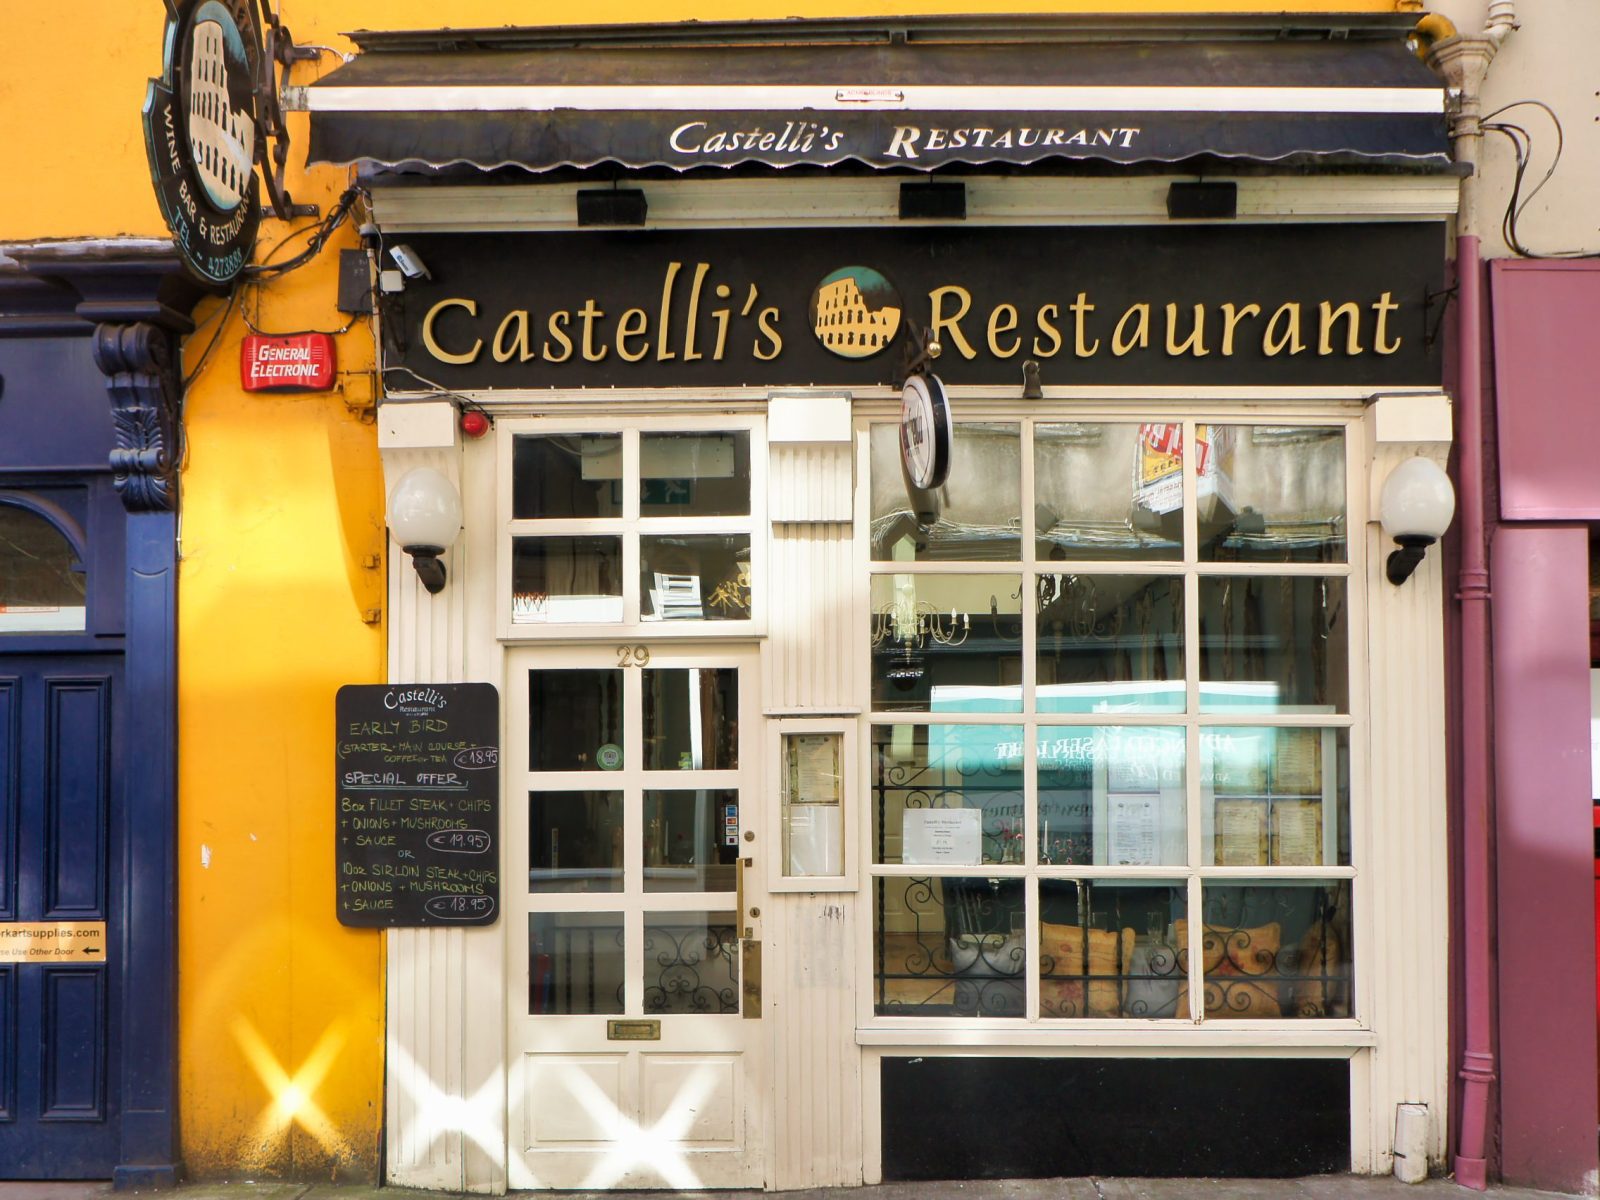 CASTELLI'S RESTAURANT AT 29 PRINCES STREET IN CORK MAY 2011 [NO LONGER IN BUSINESS]